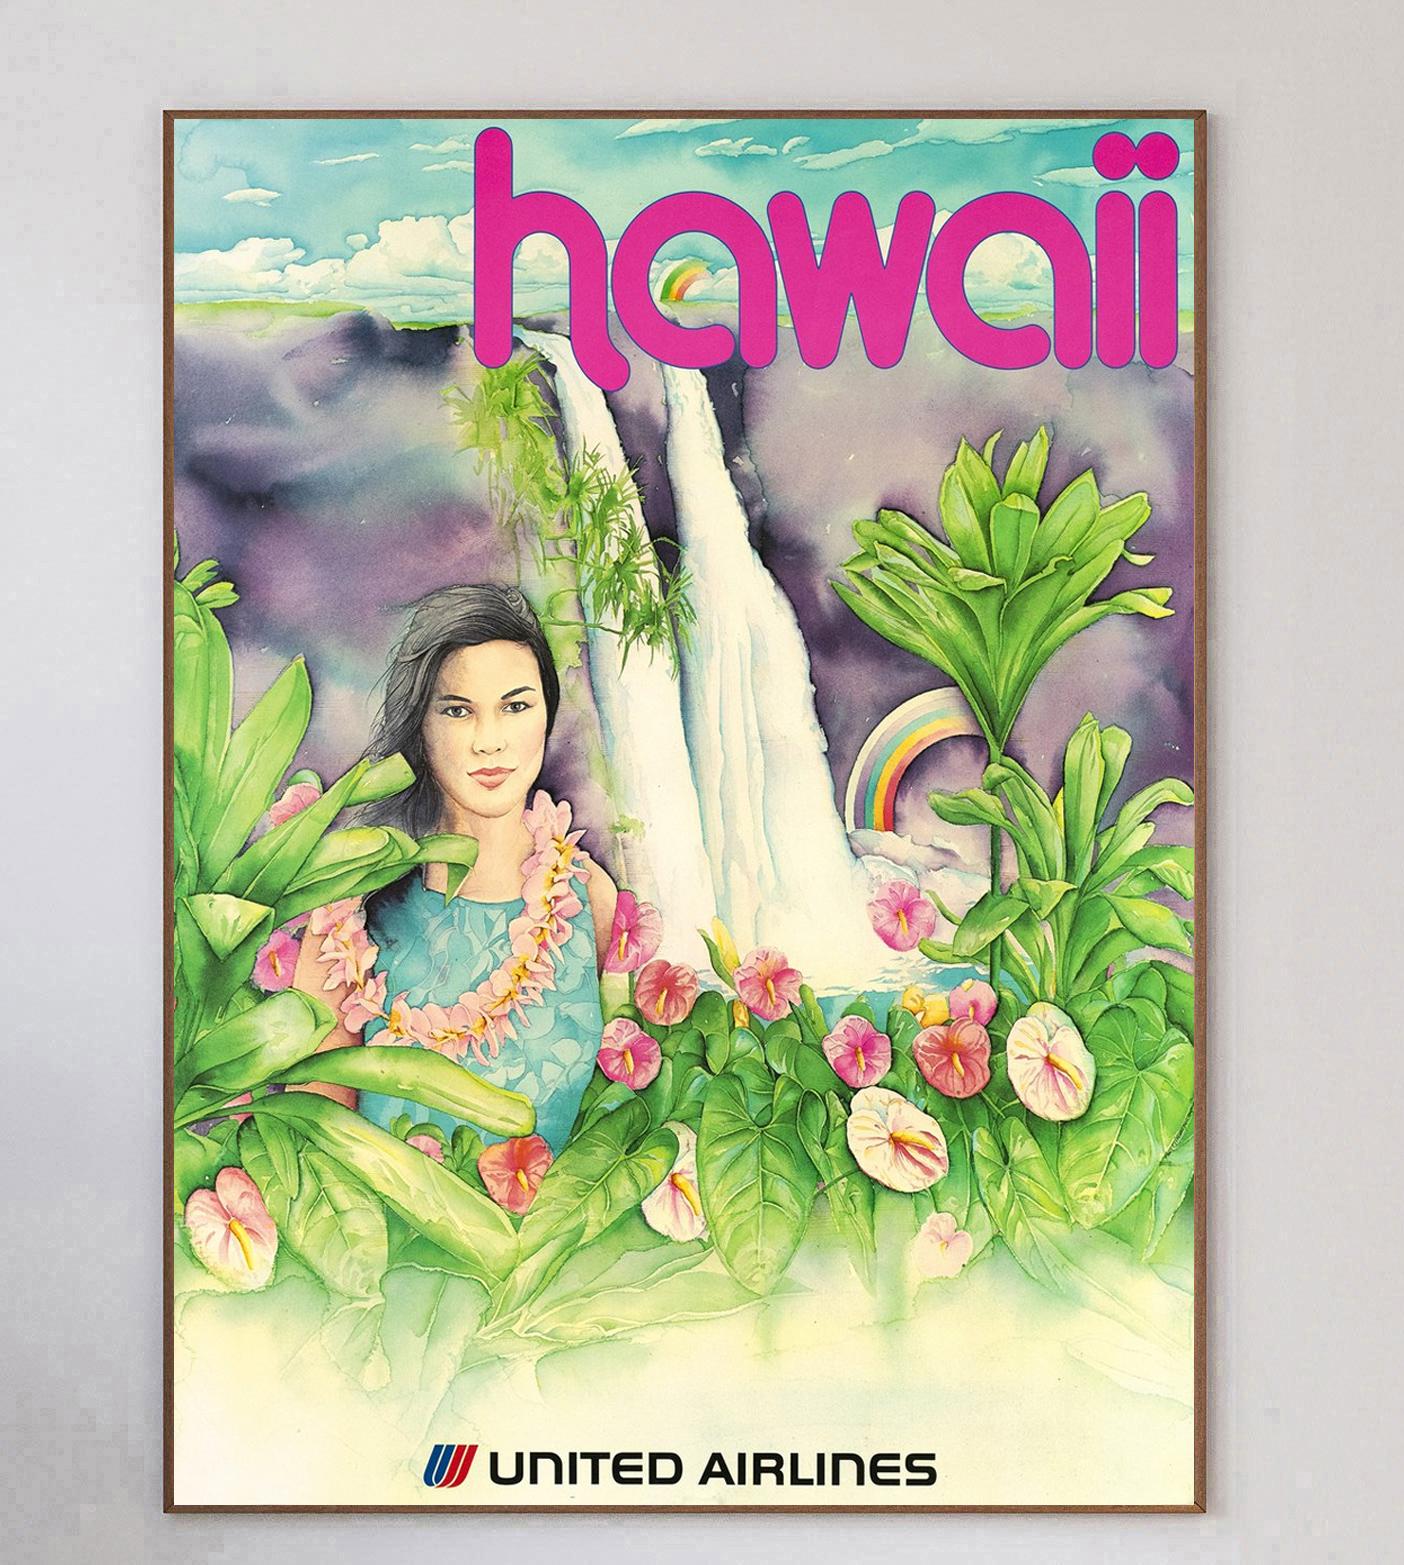 With brilliant artwork depicting a woman in the natural fauna in front of a waterfall and rainbow, this stunning and rare poster from 1970 promotes United Airlines routes to Hawaii. This colourful design is in brilliant condition and evokes the